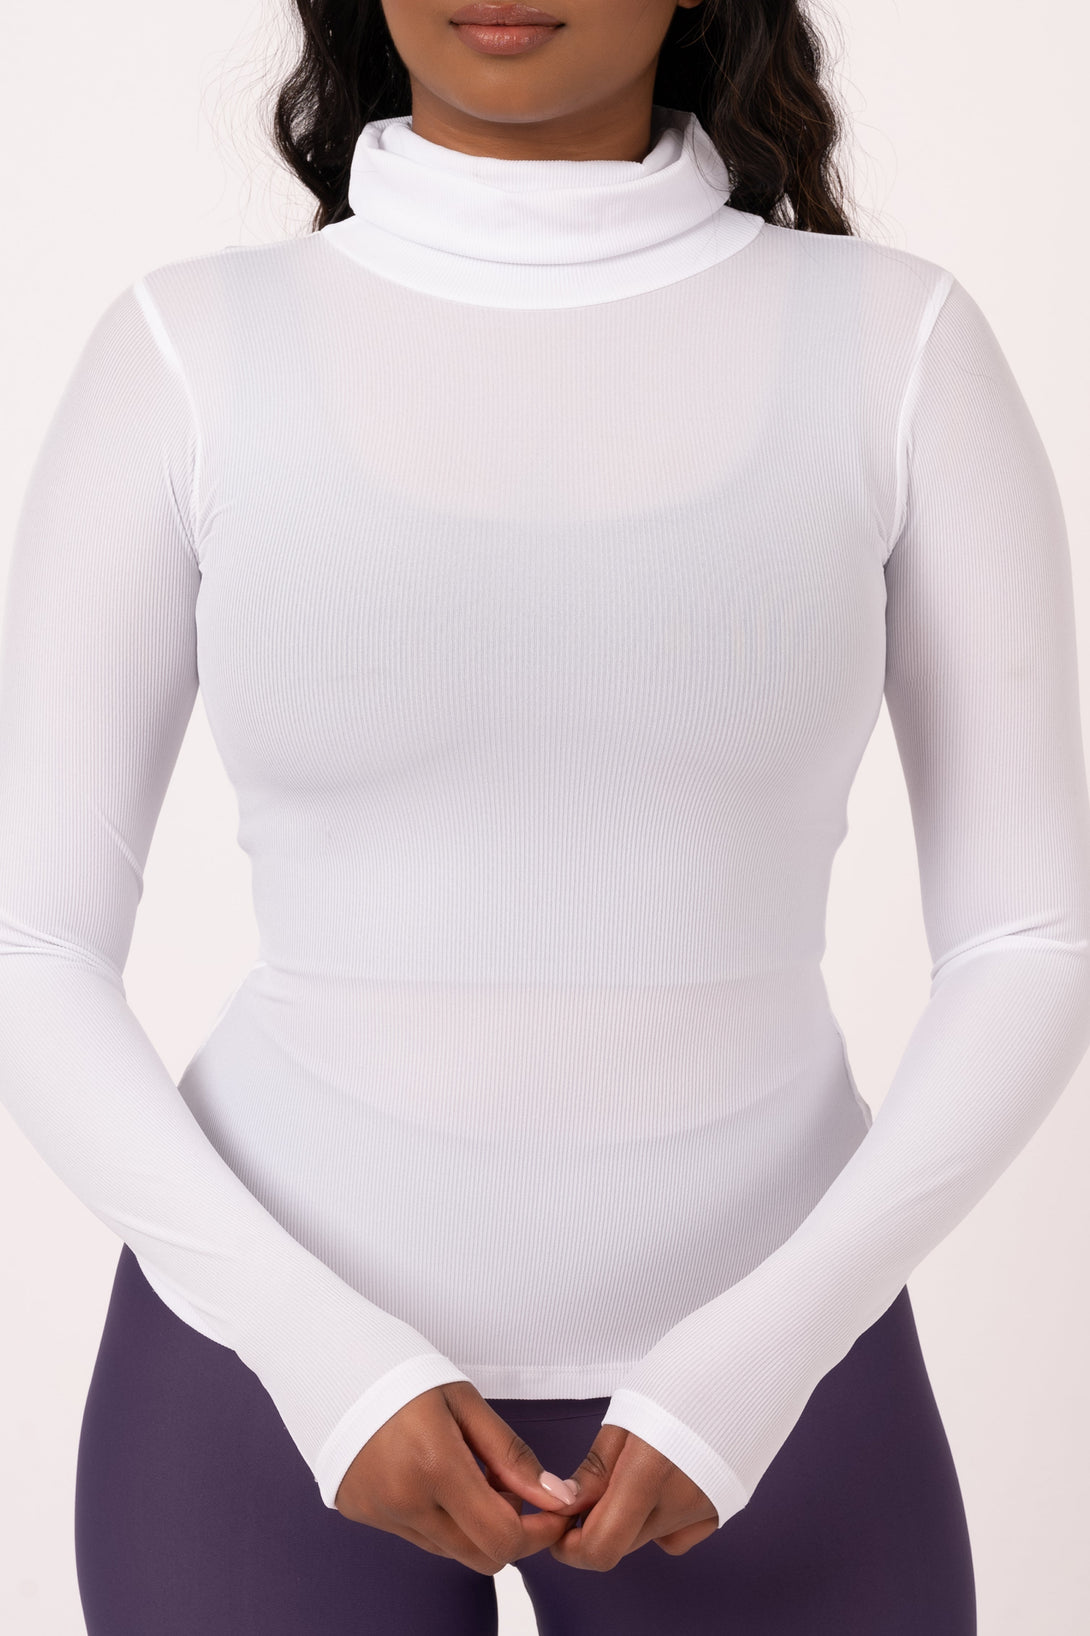 White Rib Knit - Fitted Turtle Neck W Long Sleeves-Activewear-Exoticathletica